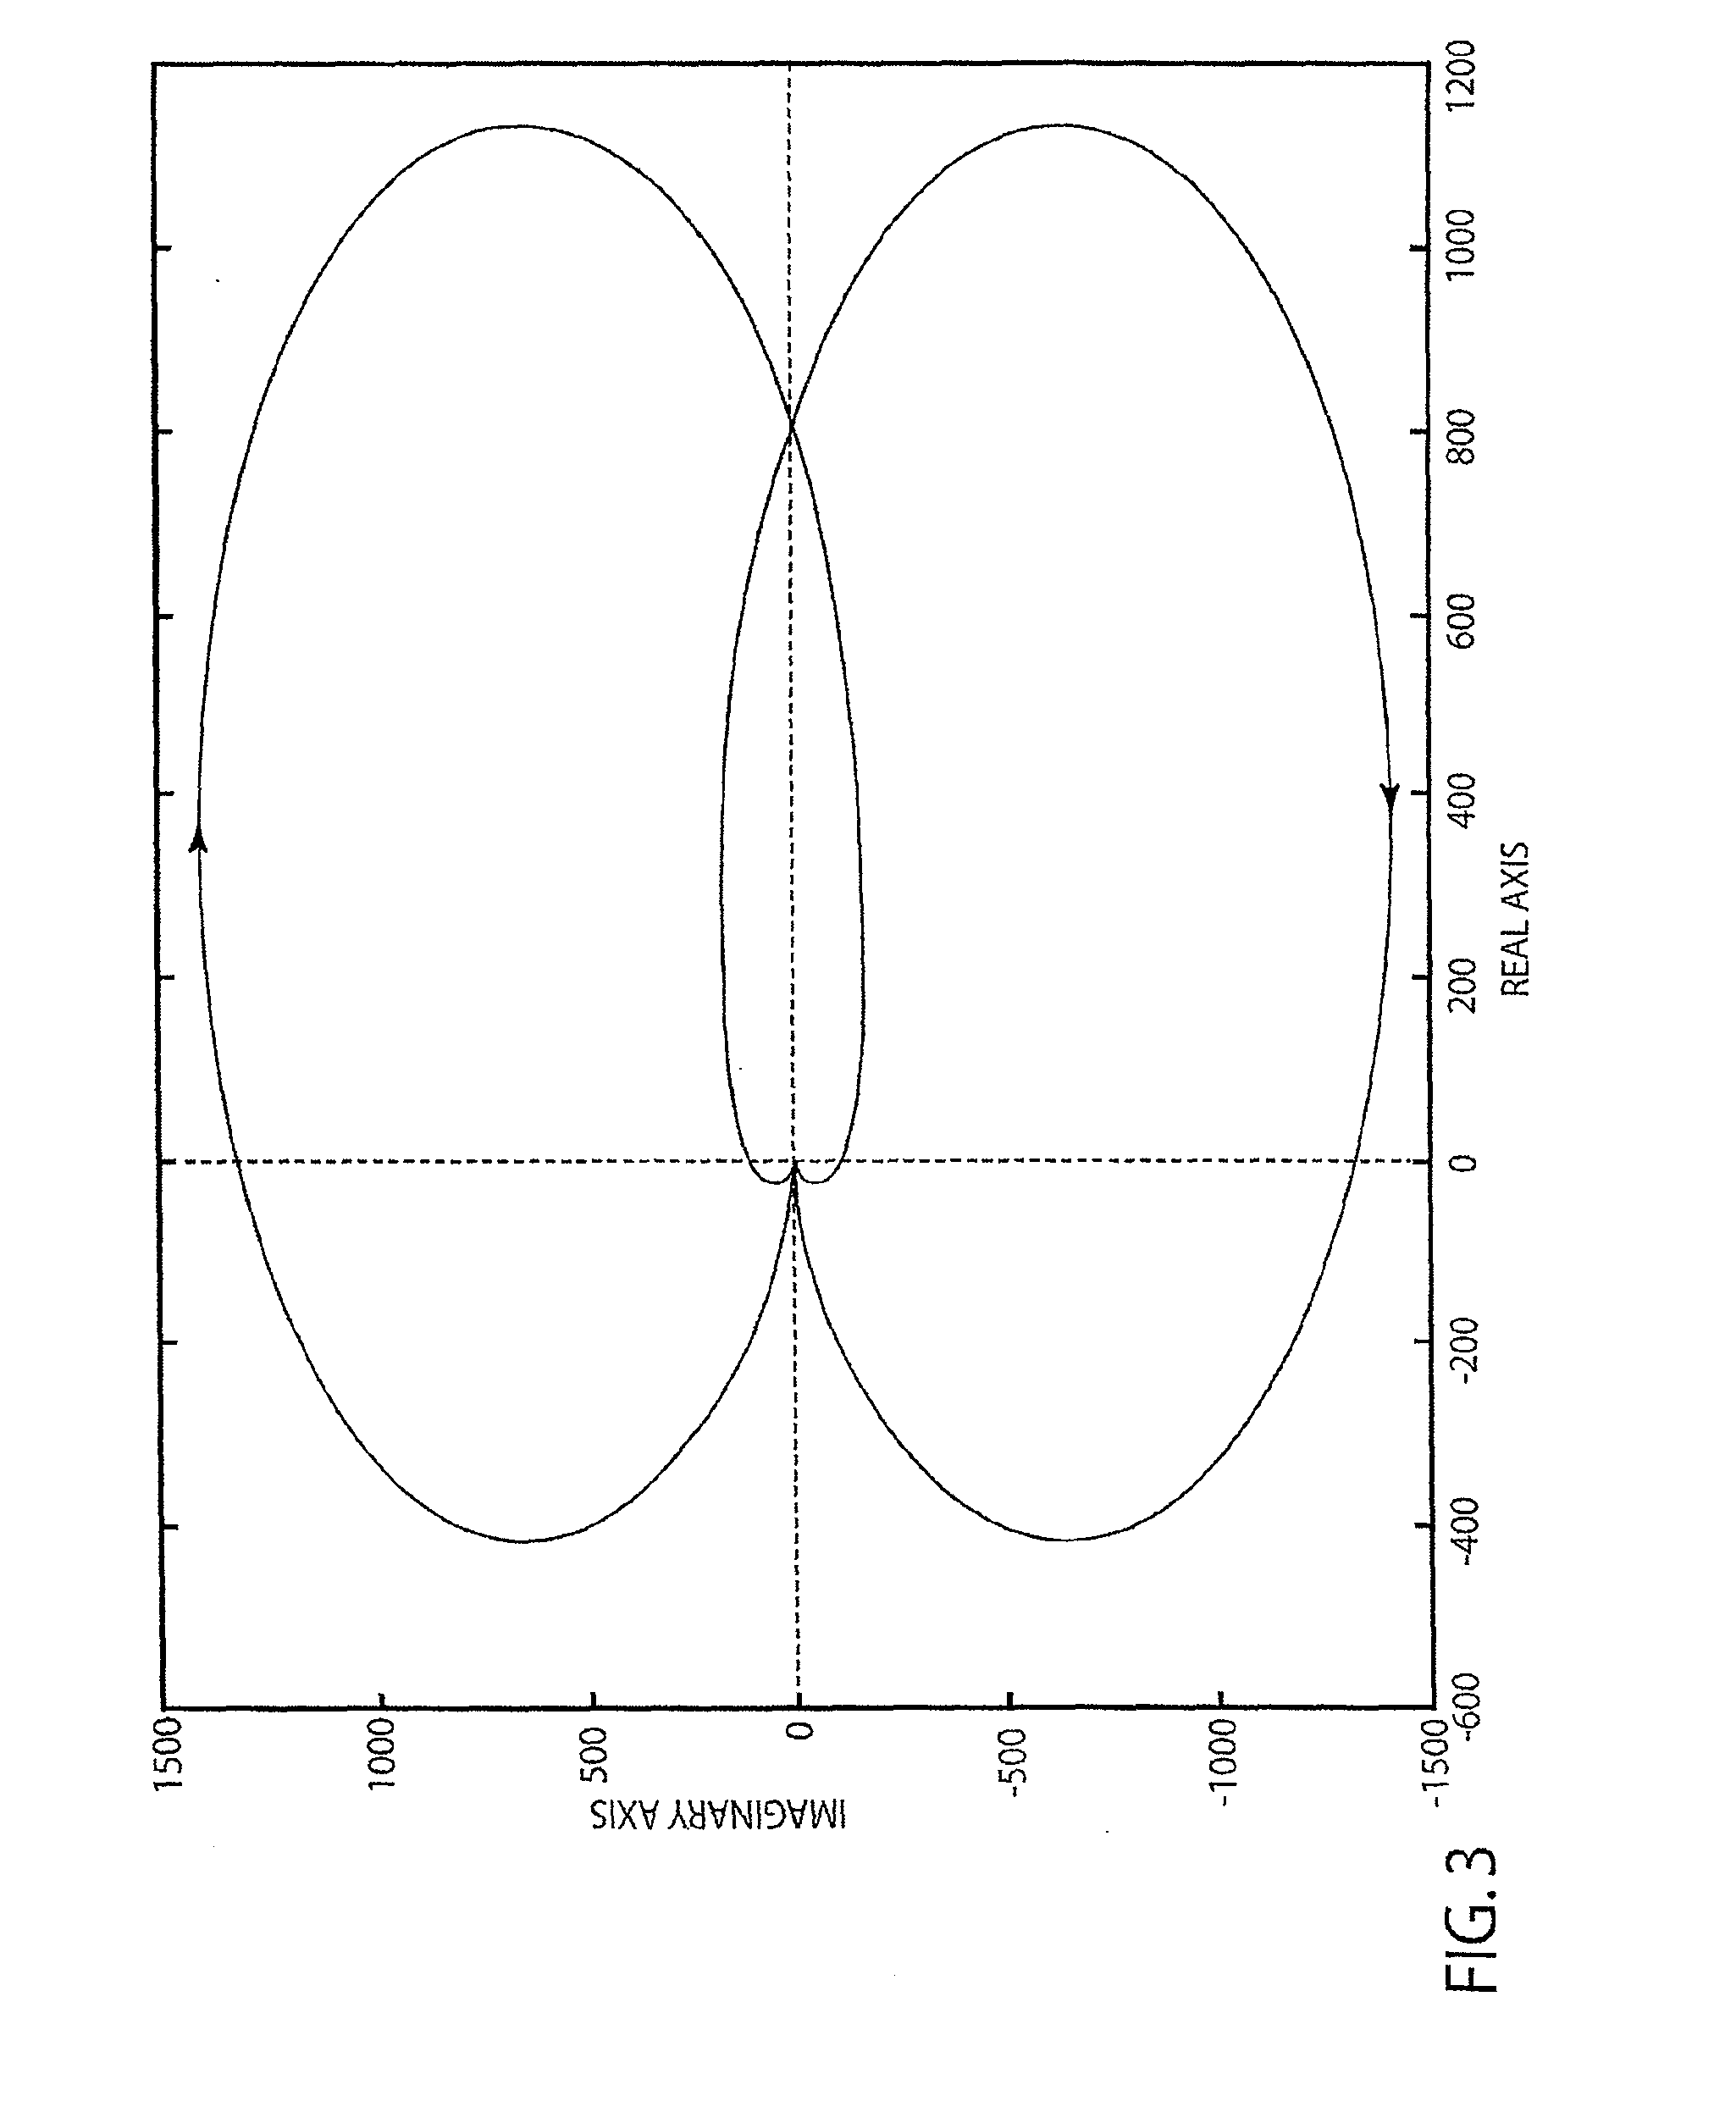 Rudder roll stabilization by nonlinear dynamic compensation